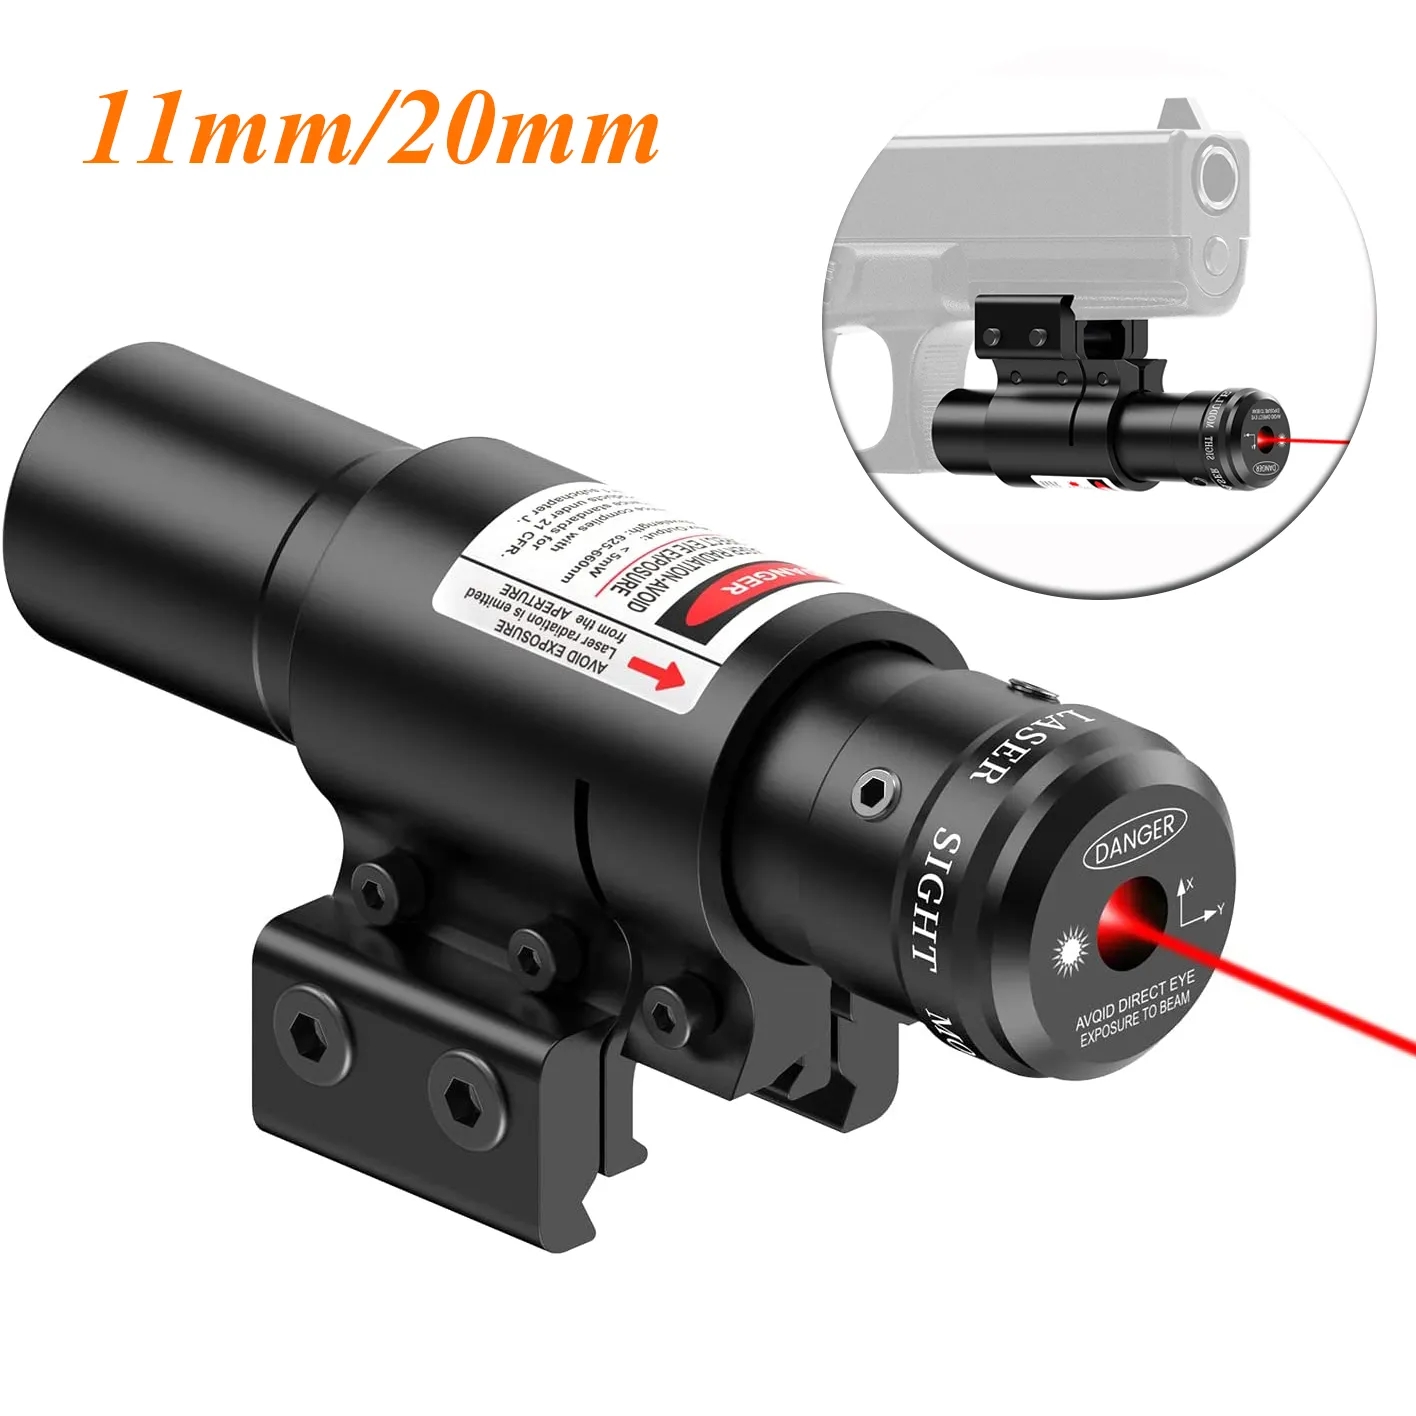 

Tactical Red Dot Laser Sight Scope 11mm 20mm Adjustable Picatinny Rail Mount Rifle Airsoft Laser with Batteries, Customize